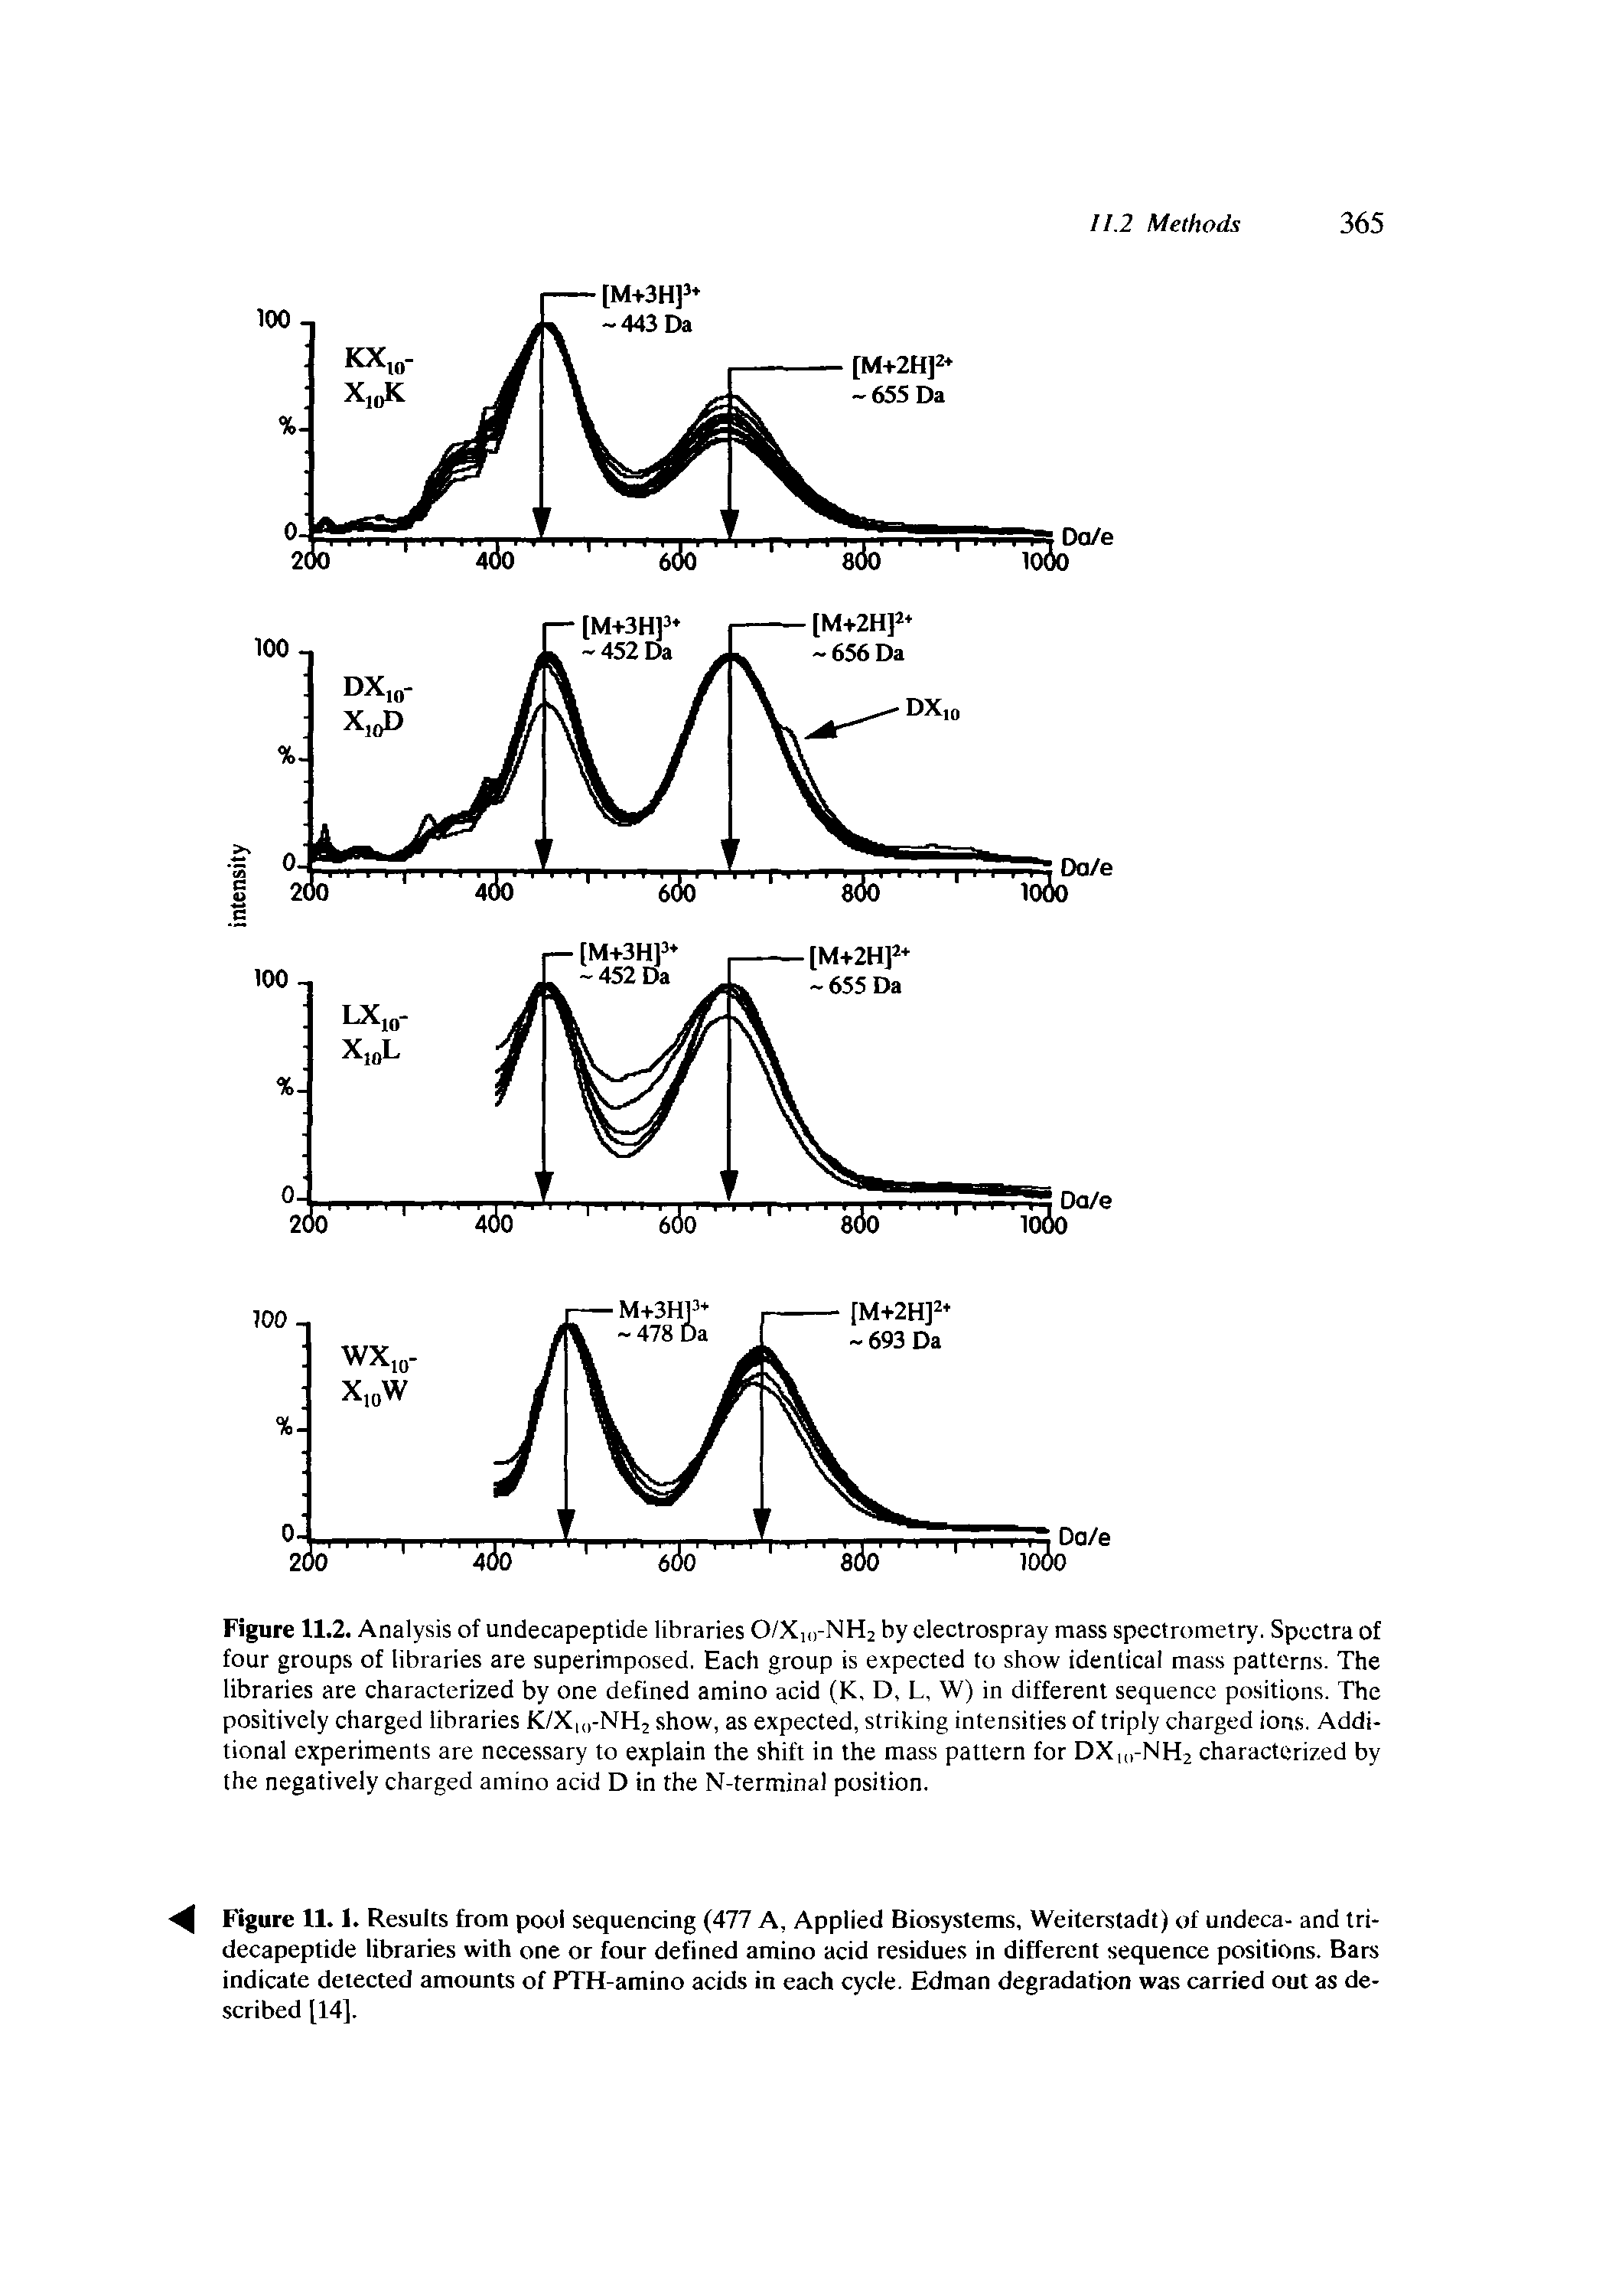 Figure 11.2. Analysis of undecapeptide libraries 0/XlirNH2 by electrospray mass spectrometry. Spectra of four groups of libraries are superimposed. Each group is expected to show identical mass patterns. The libraries are characterized by one defined amino acid (K, D, L, W) in different sequence positions. The positively charged libraries K/X, -NH2 show, as expected, striking intensities of triply charged ions. Additional experiments are necessary to explain the shift in the mass pattern for DXurNH2 characterized by the negatively charged amino acid D in the N-terminal position.